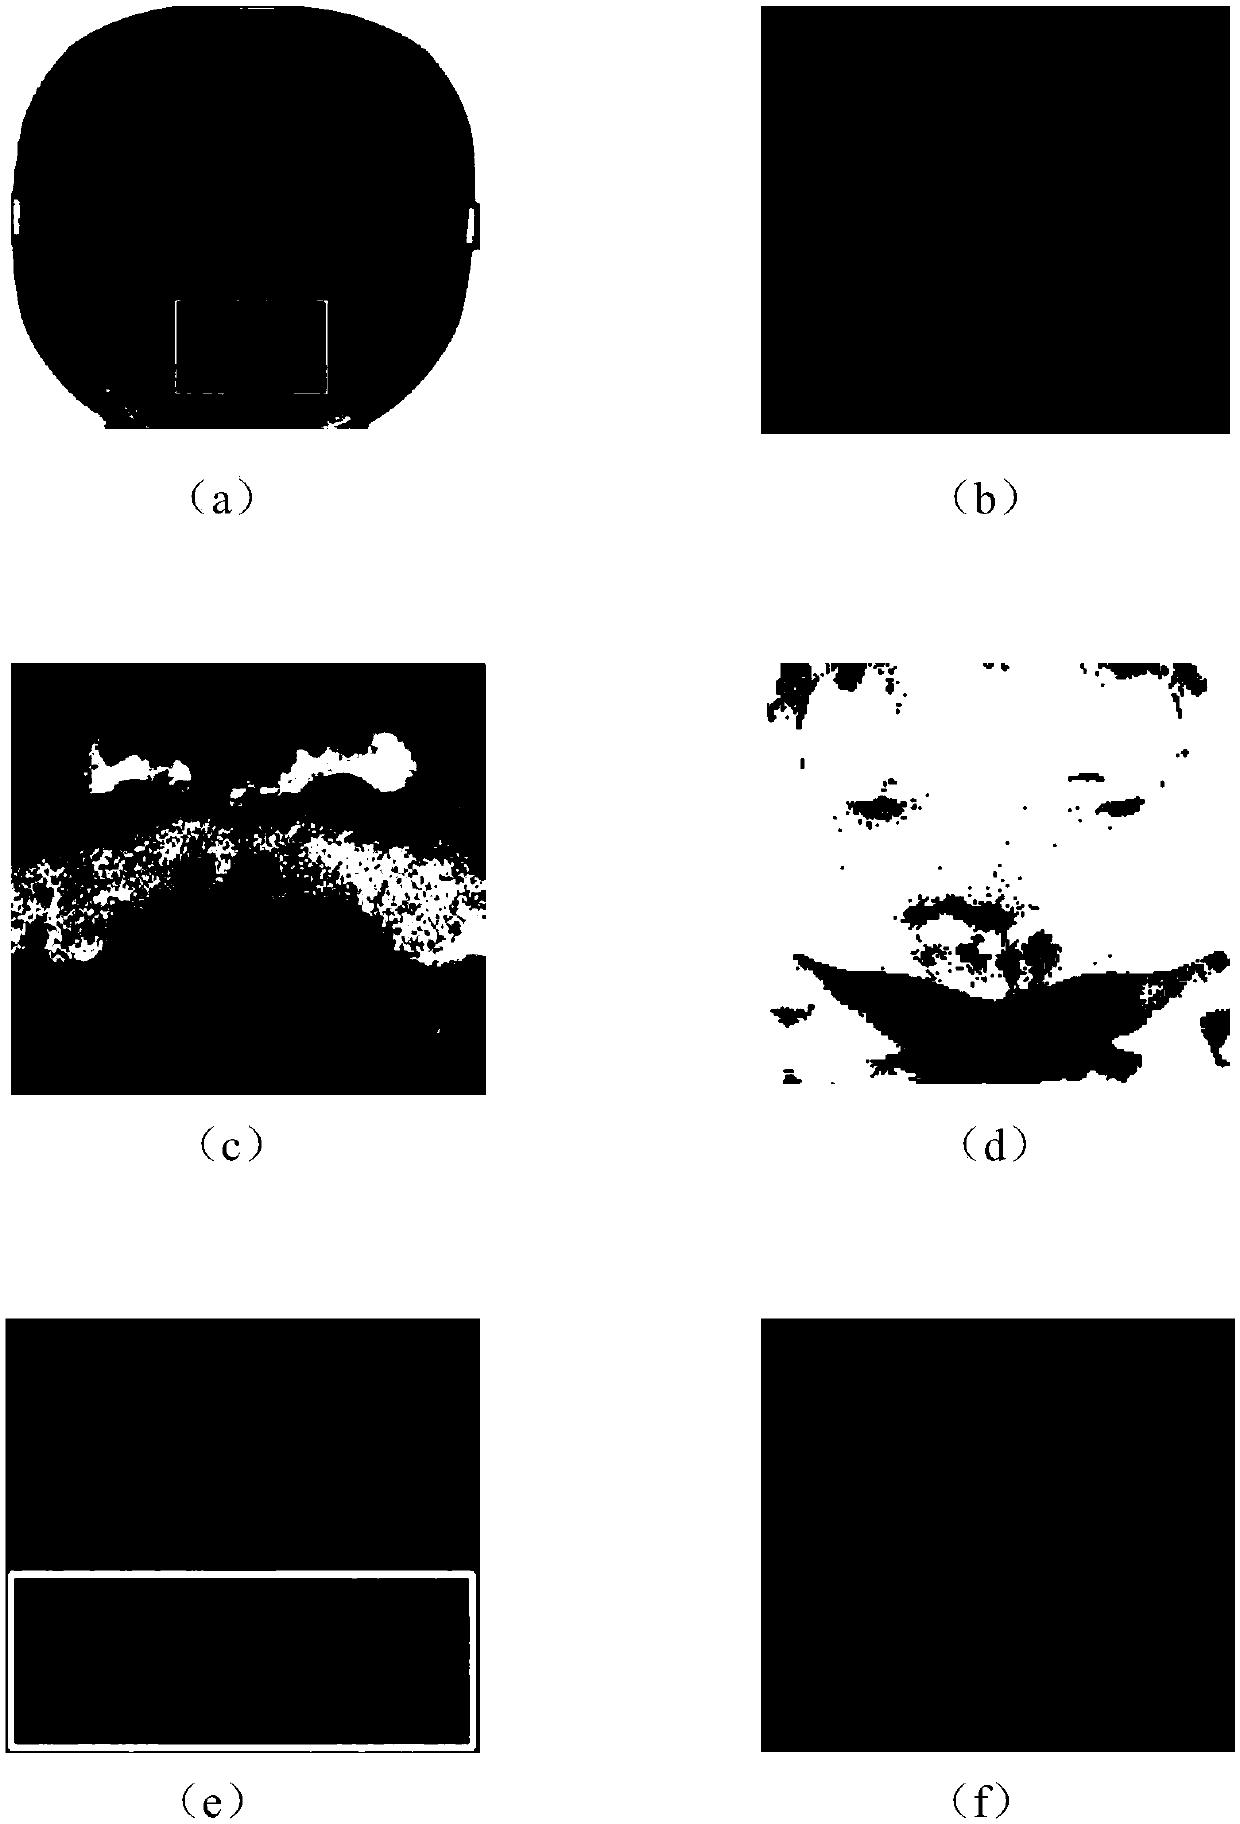 Lip image segmentation device and method for traditional Chinese medicine face diagnosis